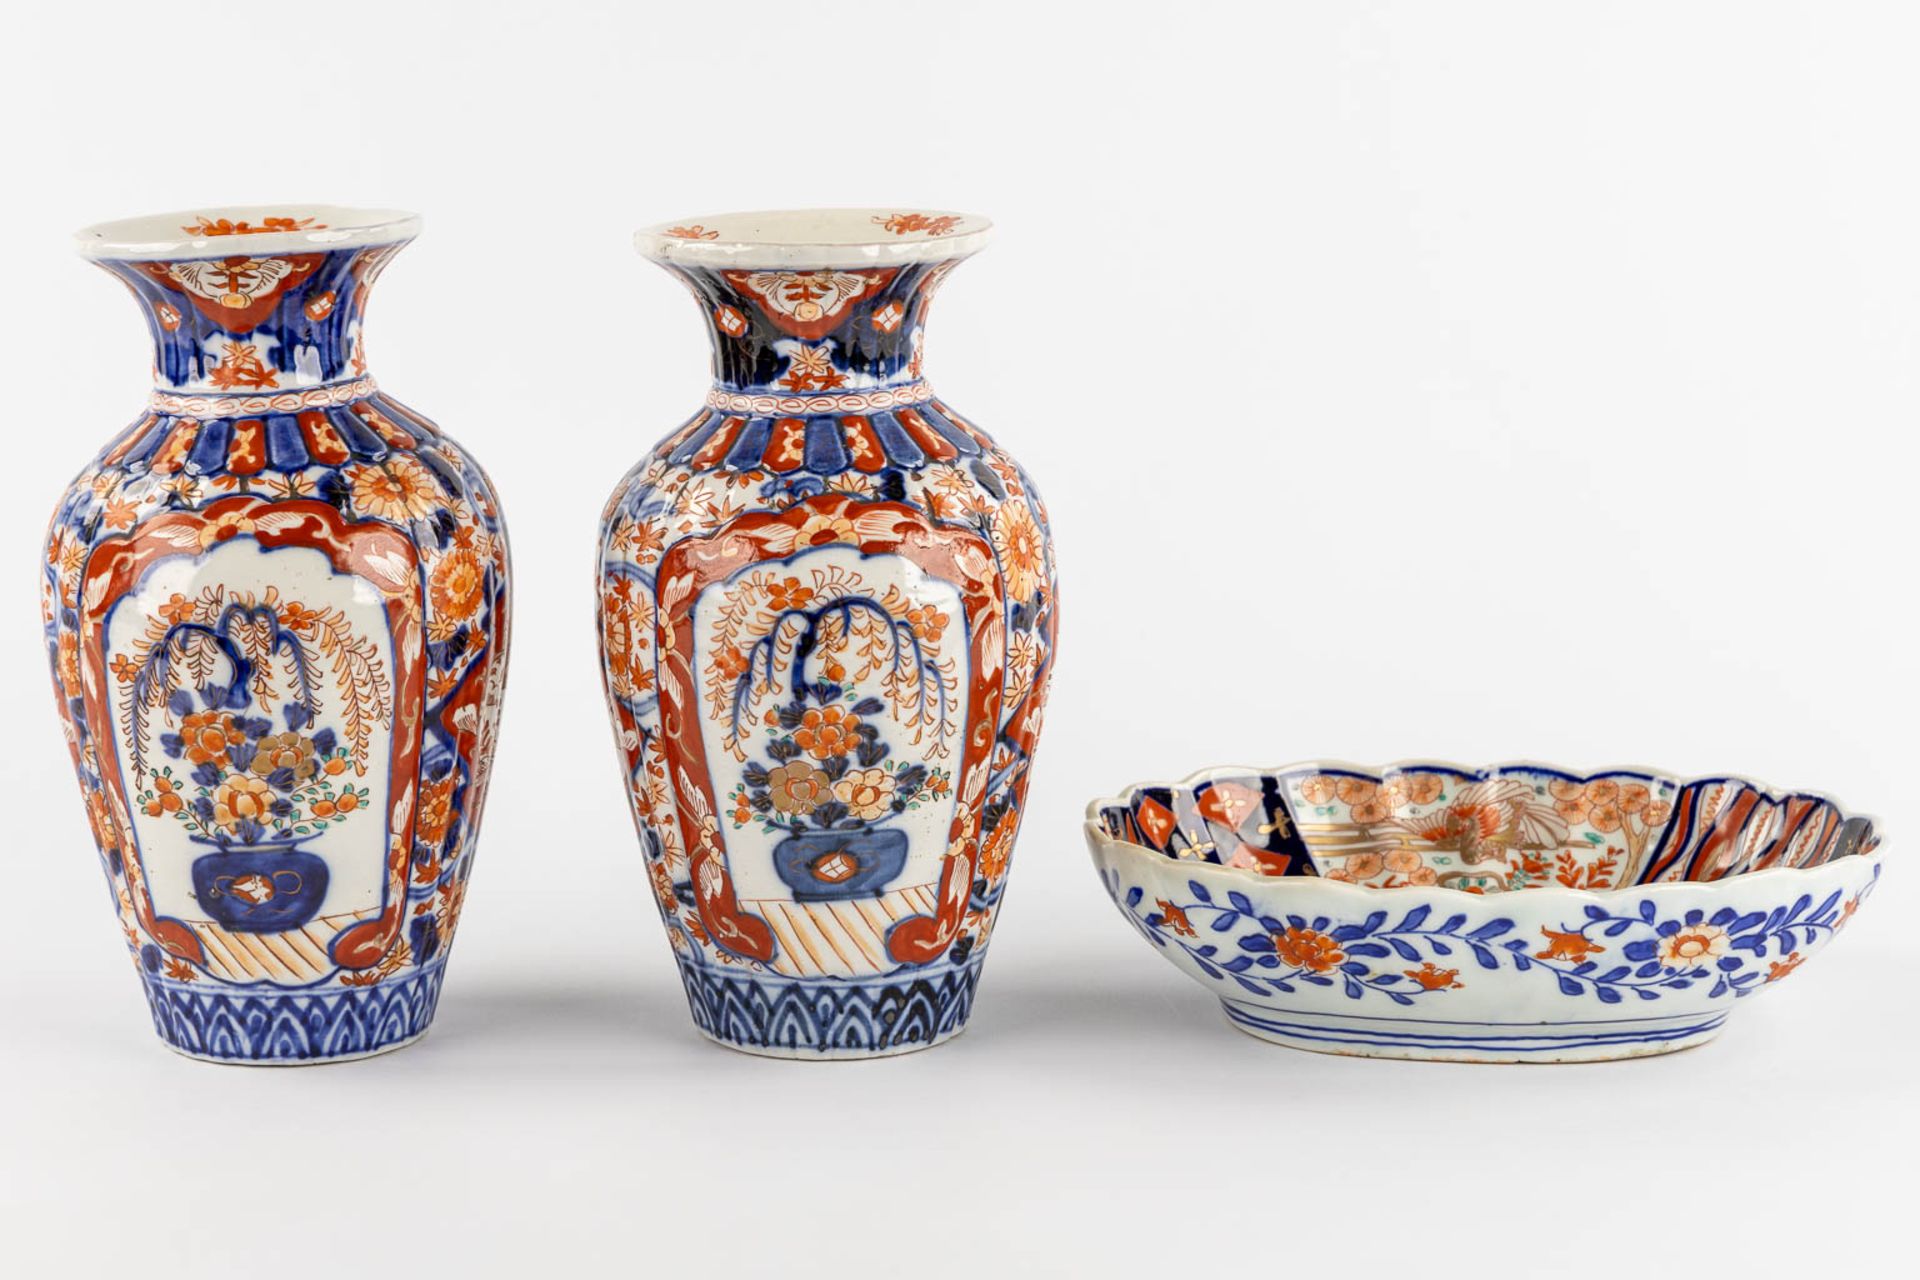 A pair of vases and a bowl, Japanese Imari porcelain. (H:25 x D:14 cm) - Image 5 of 11